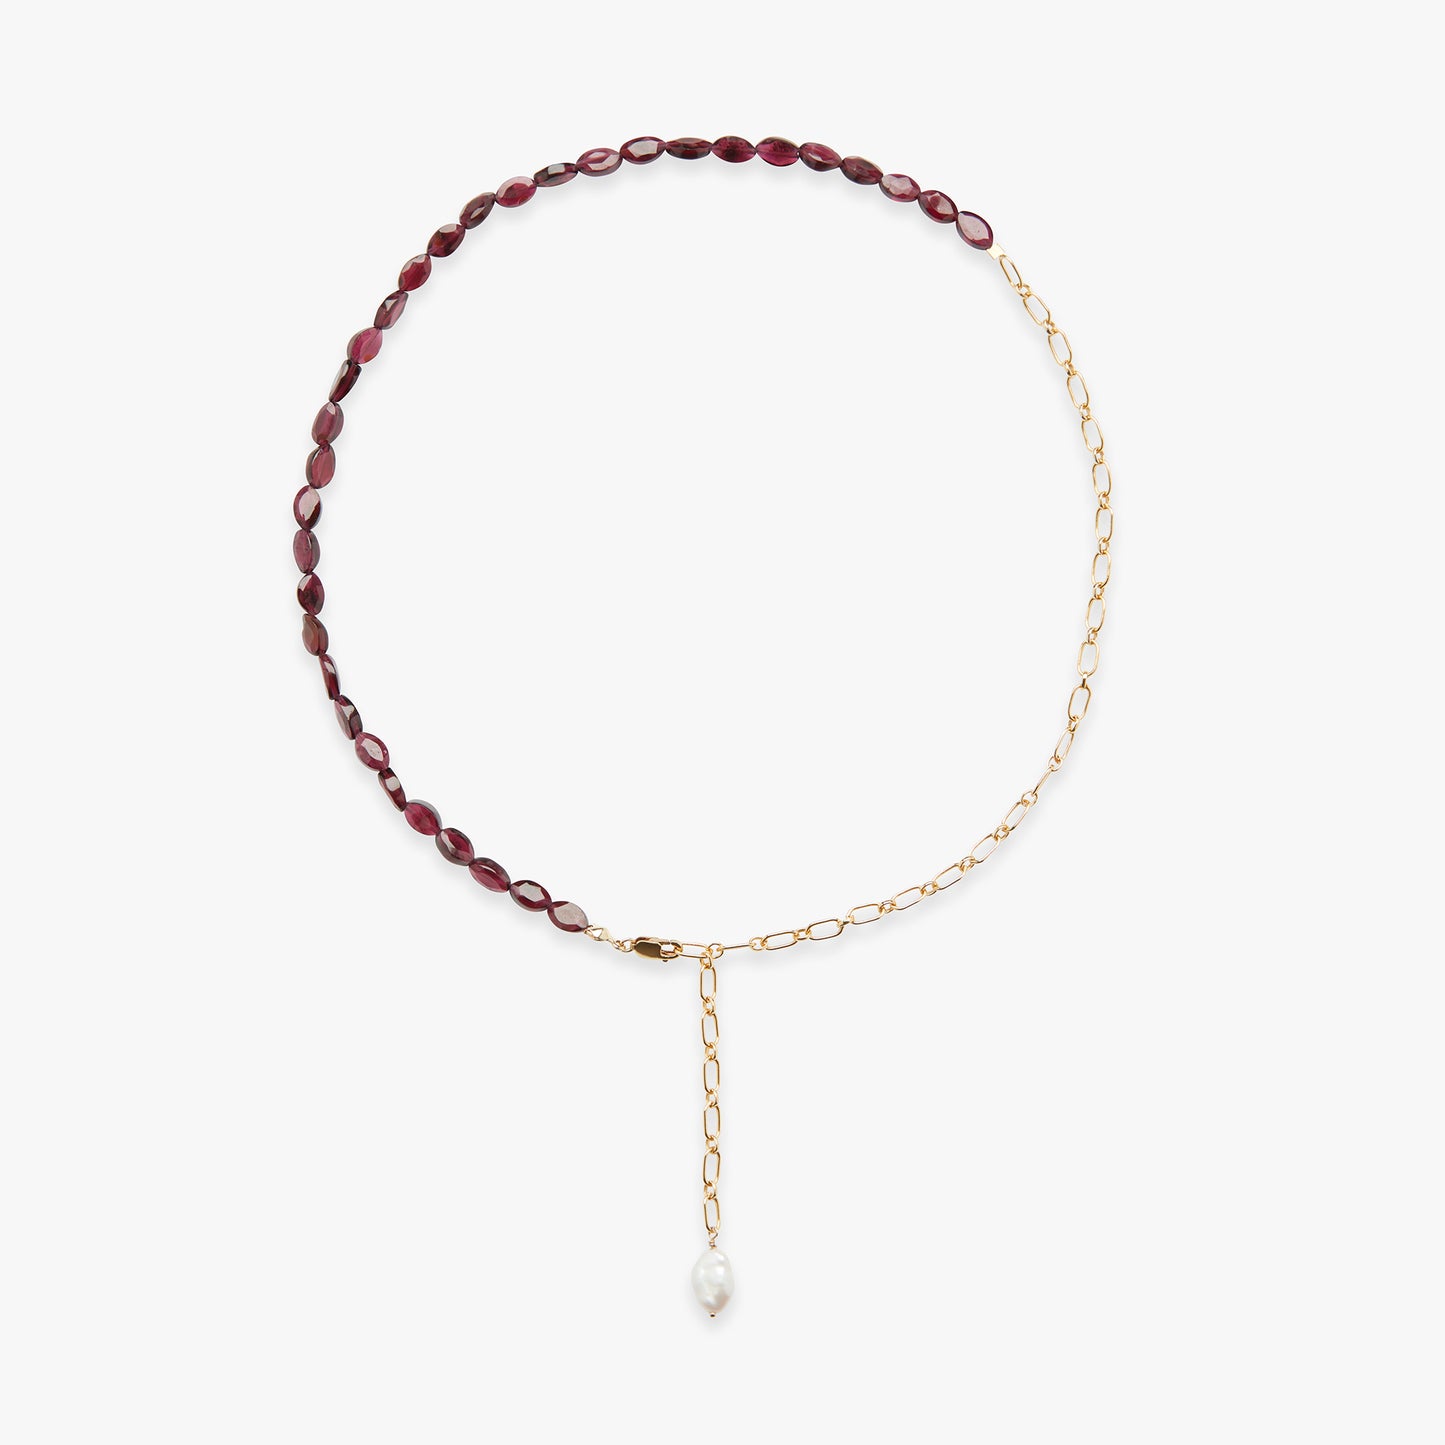 Pomegranate Seeds lariat ketting gold filled